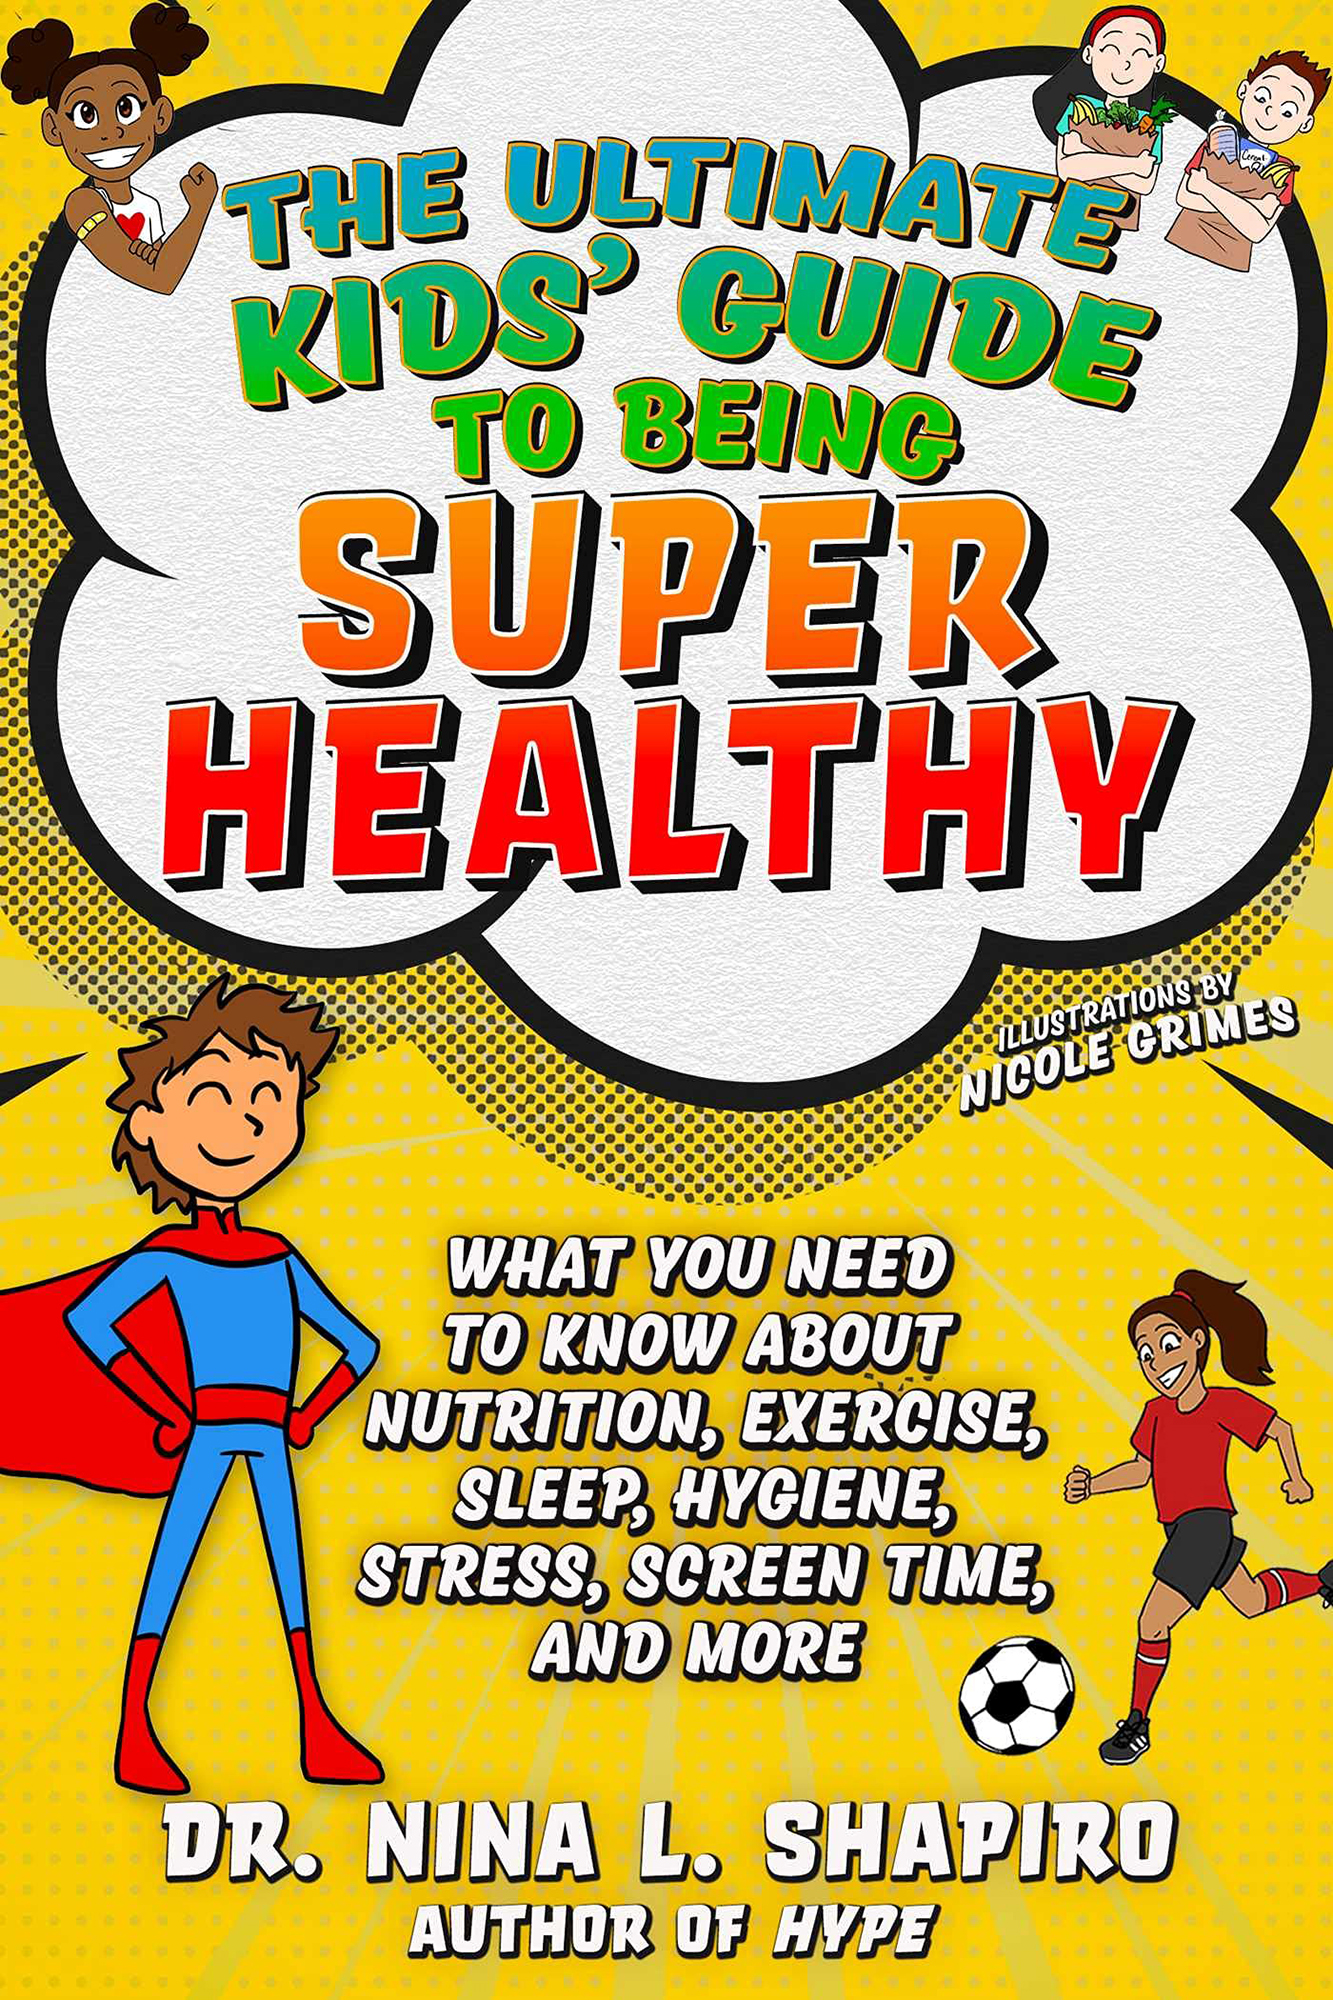 Shapiro's book puts kids in control of their health, empowering them to make good choices and get into a routine.